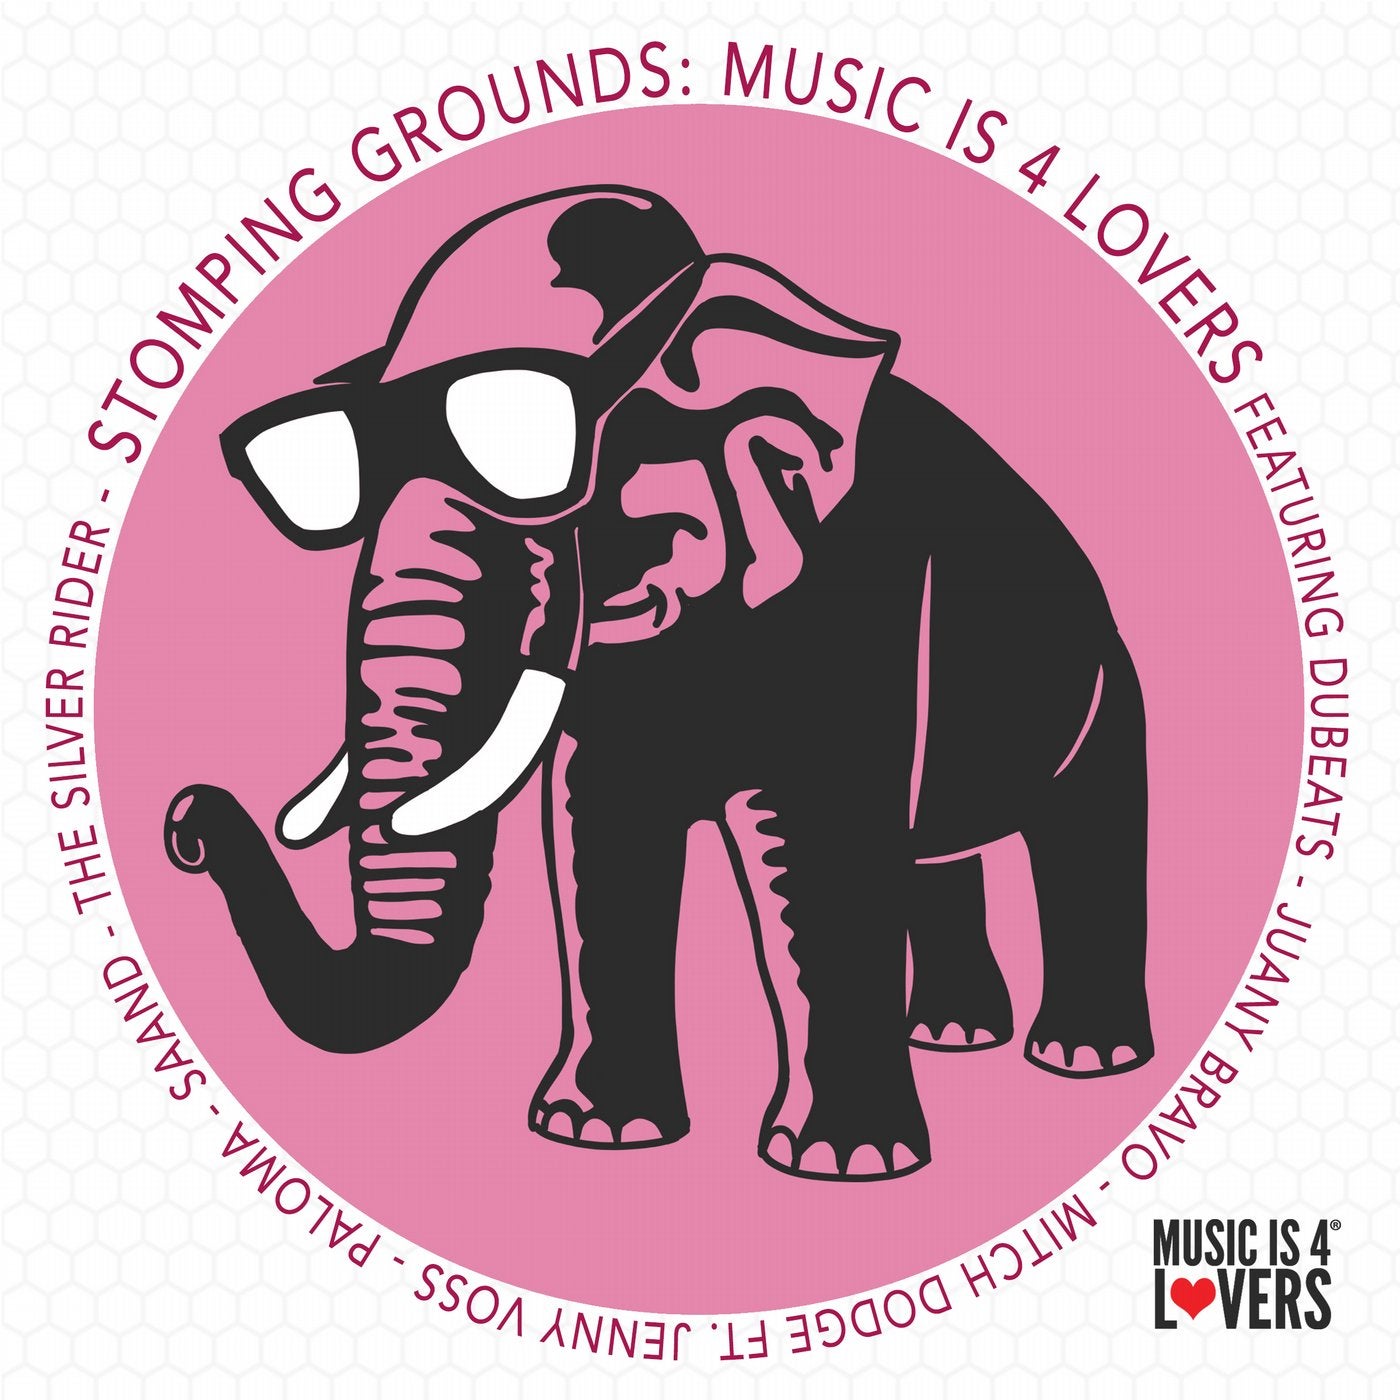 STOMPING GROUNDS: Music is 4 Lovers